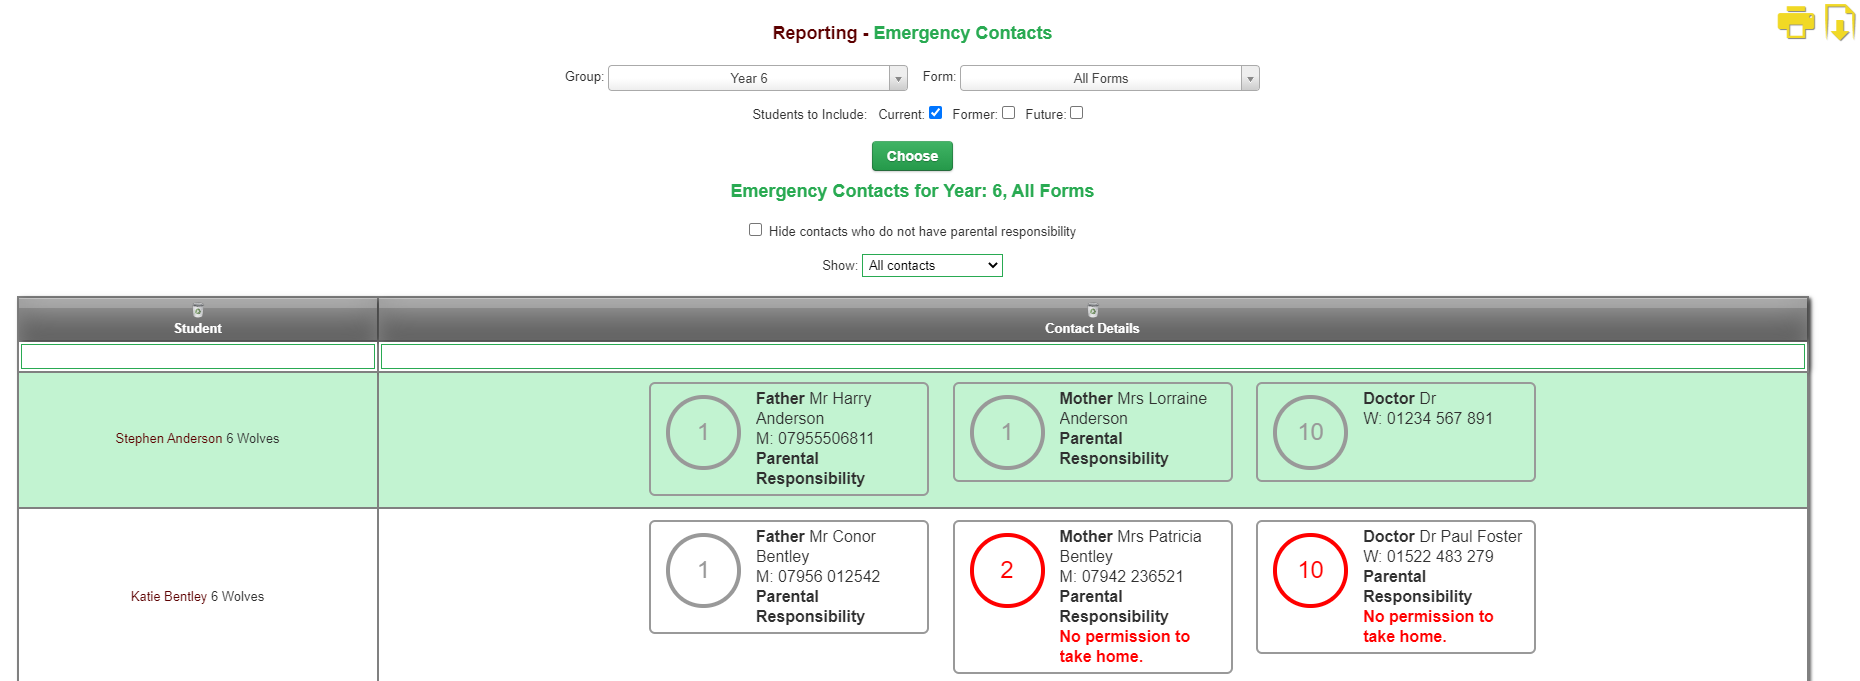 emergency contacts sp report.png